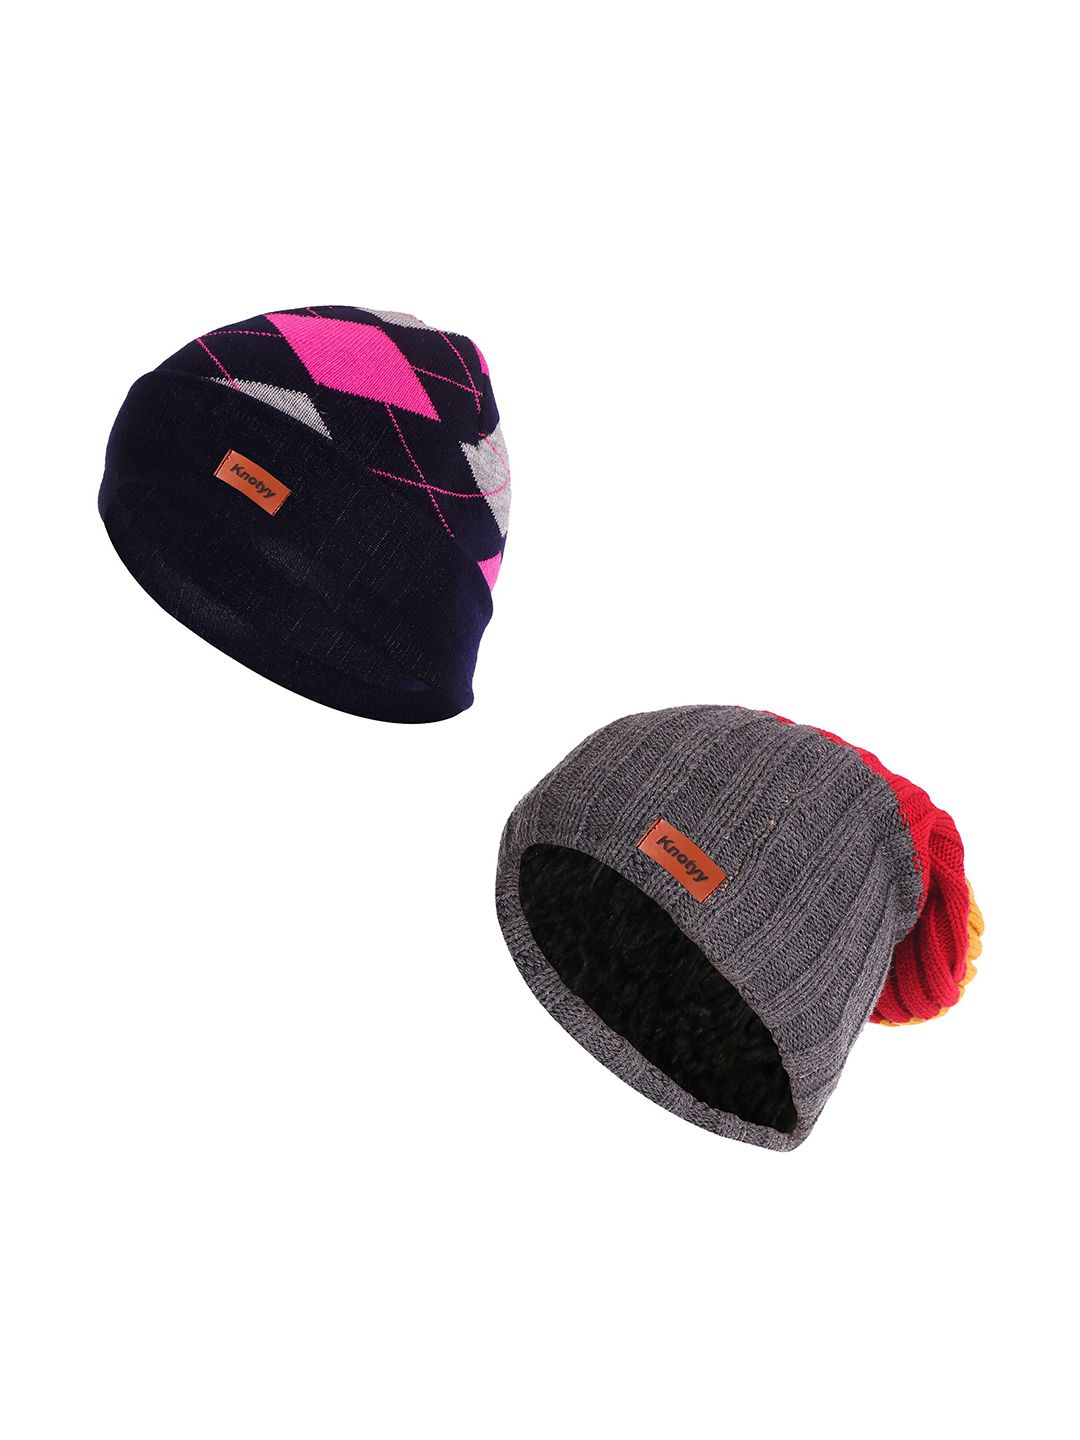 Knotyy Unisex Pack Of 2 Self Design Acrylic Beanies Price in India